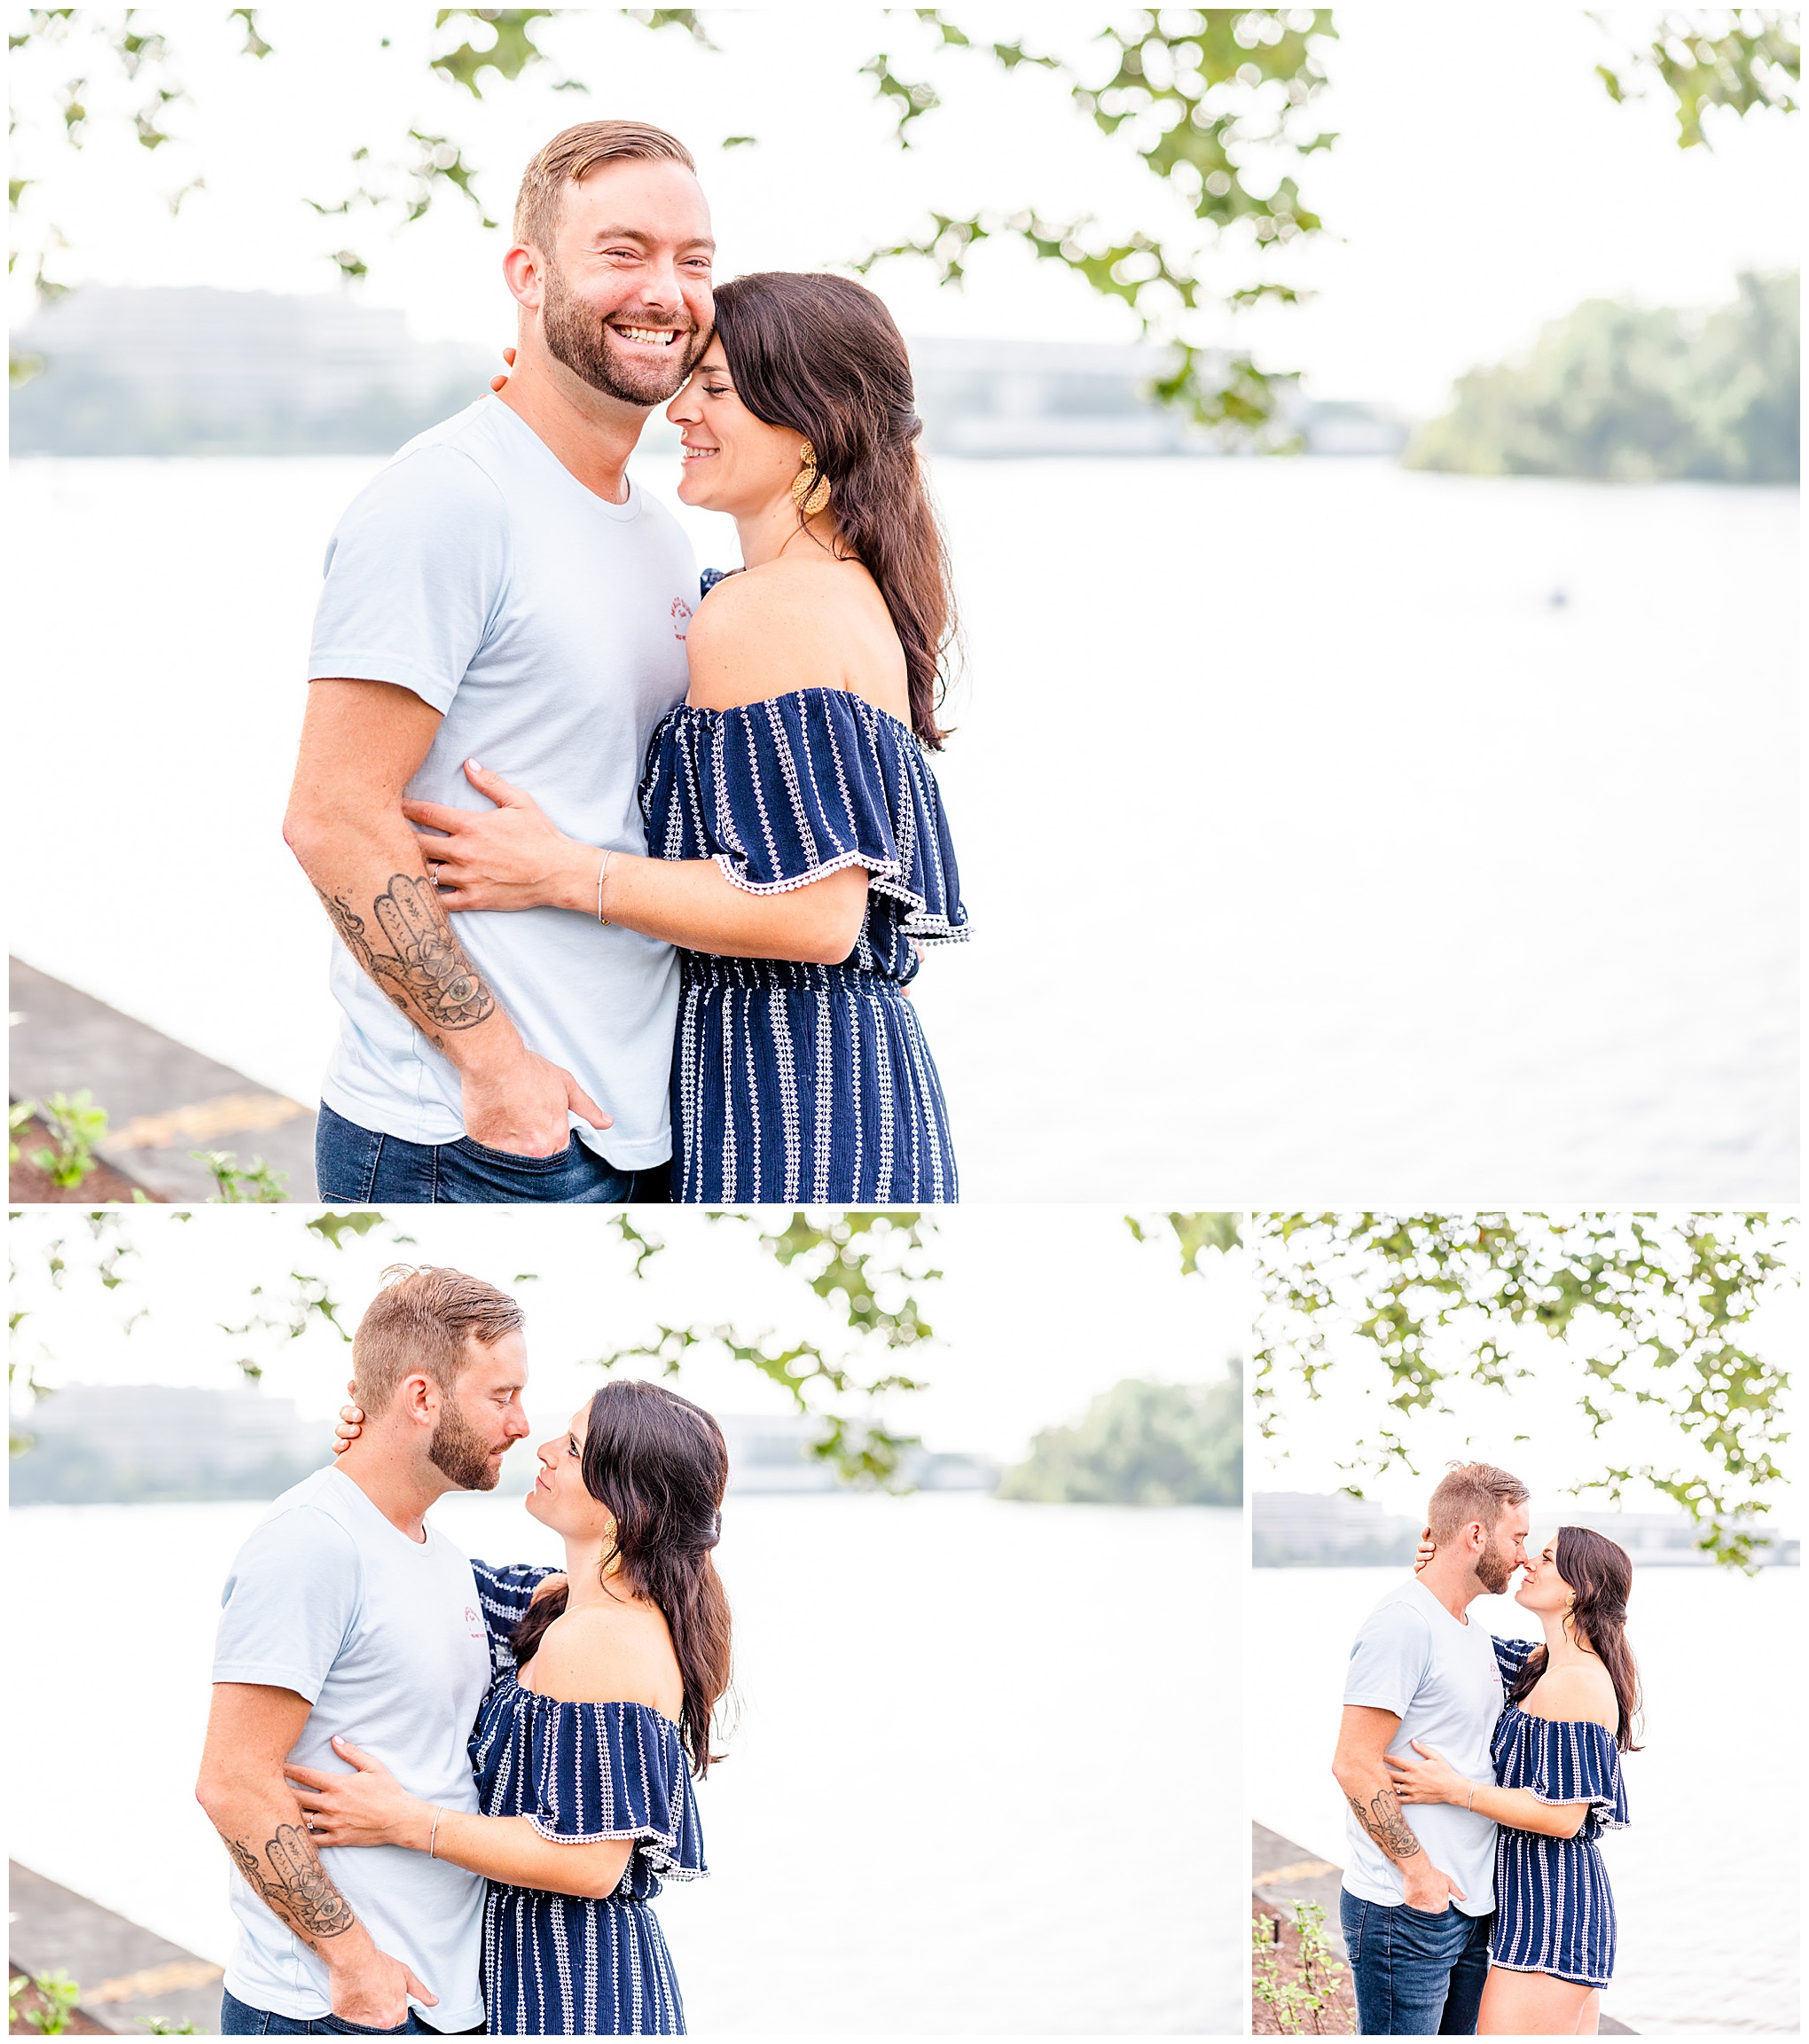 Georgetown waterfront engagement session, Georgetown engagement photos, Georgetown wedding photographer, DC wedding photographer, waterfront engagement photos, Georgetown waterfront engagement photos, DC engagement photos, Rachel E.H. Photography, summer engagement photos, couple almost kissing, woman in blue romper, woman with head on man's chin